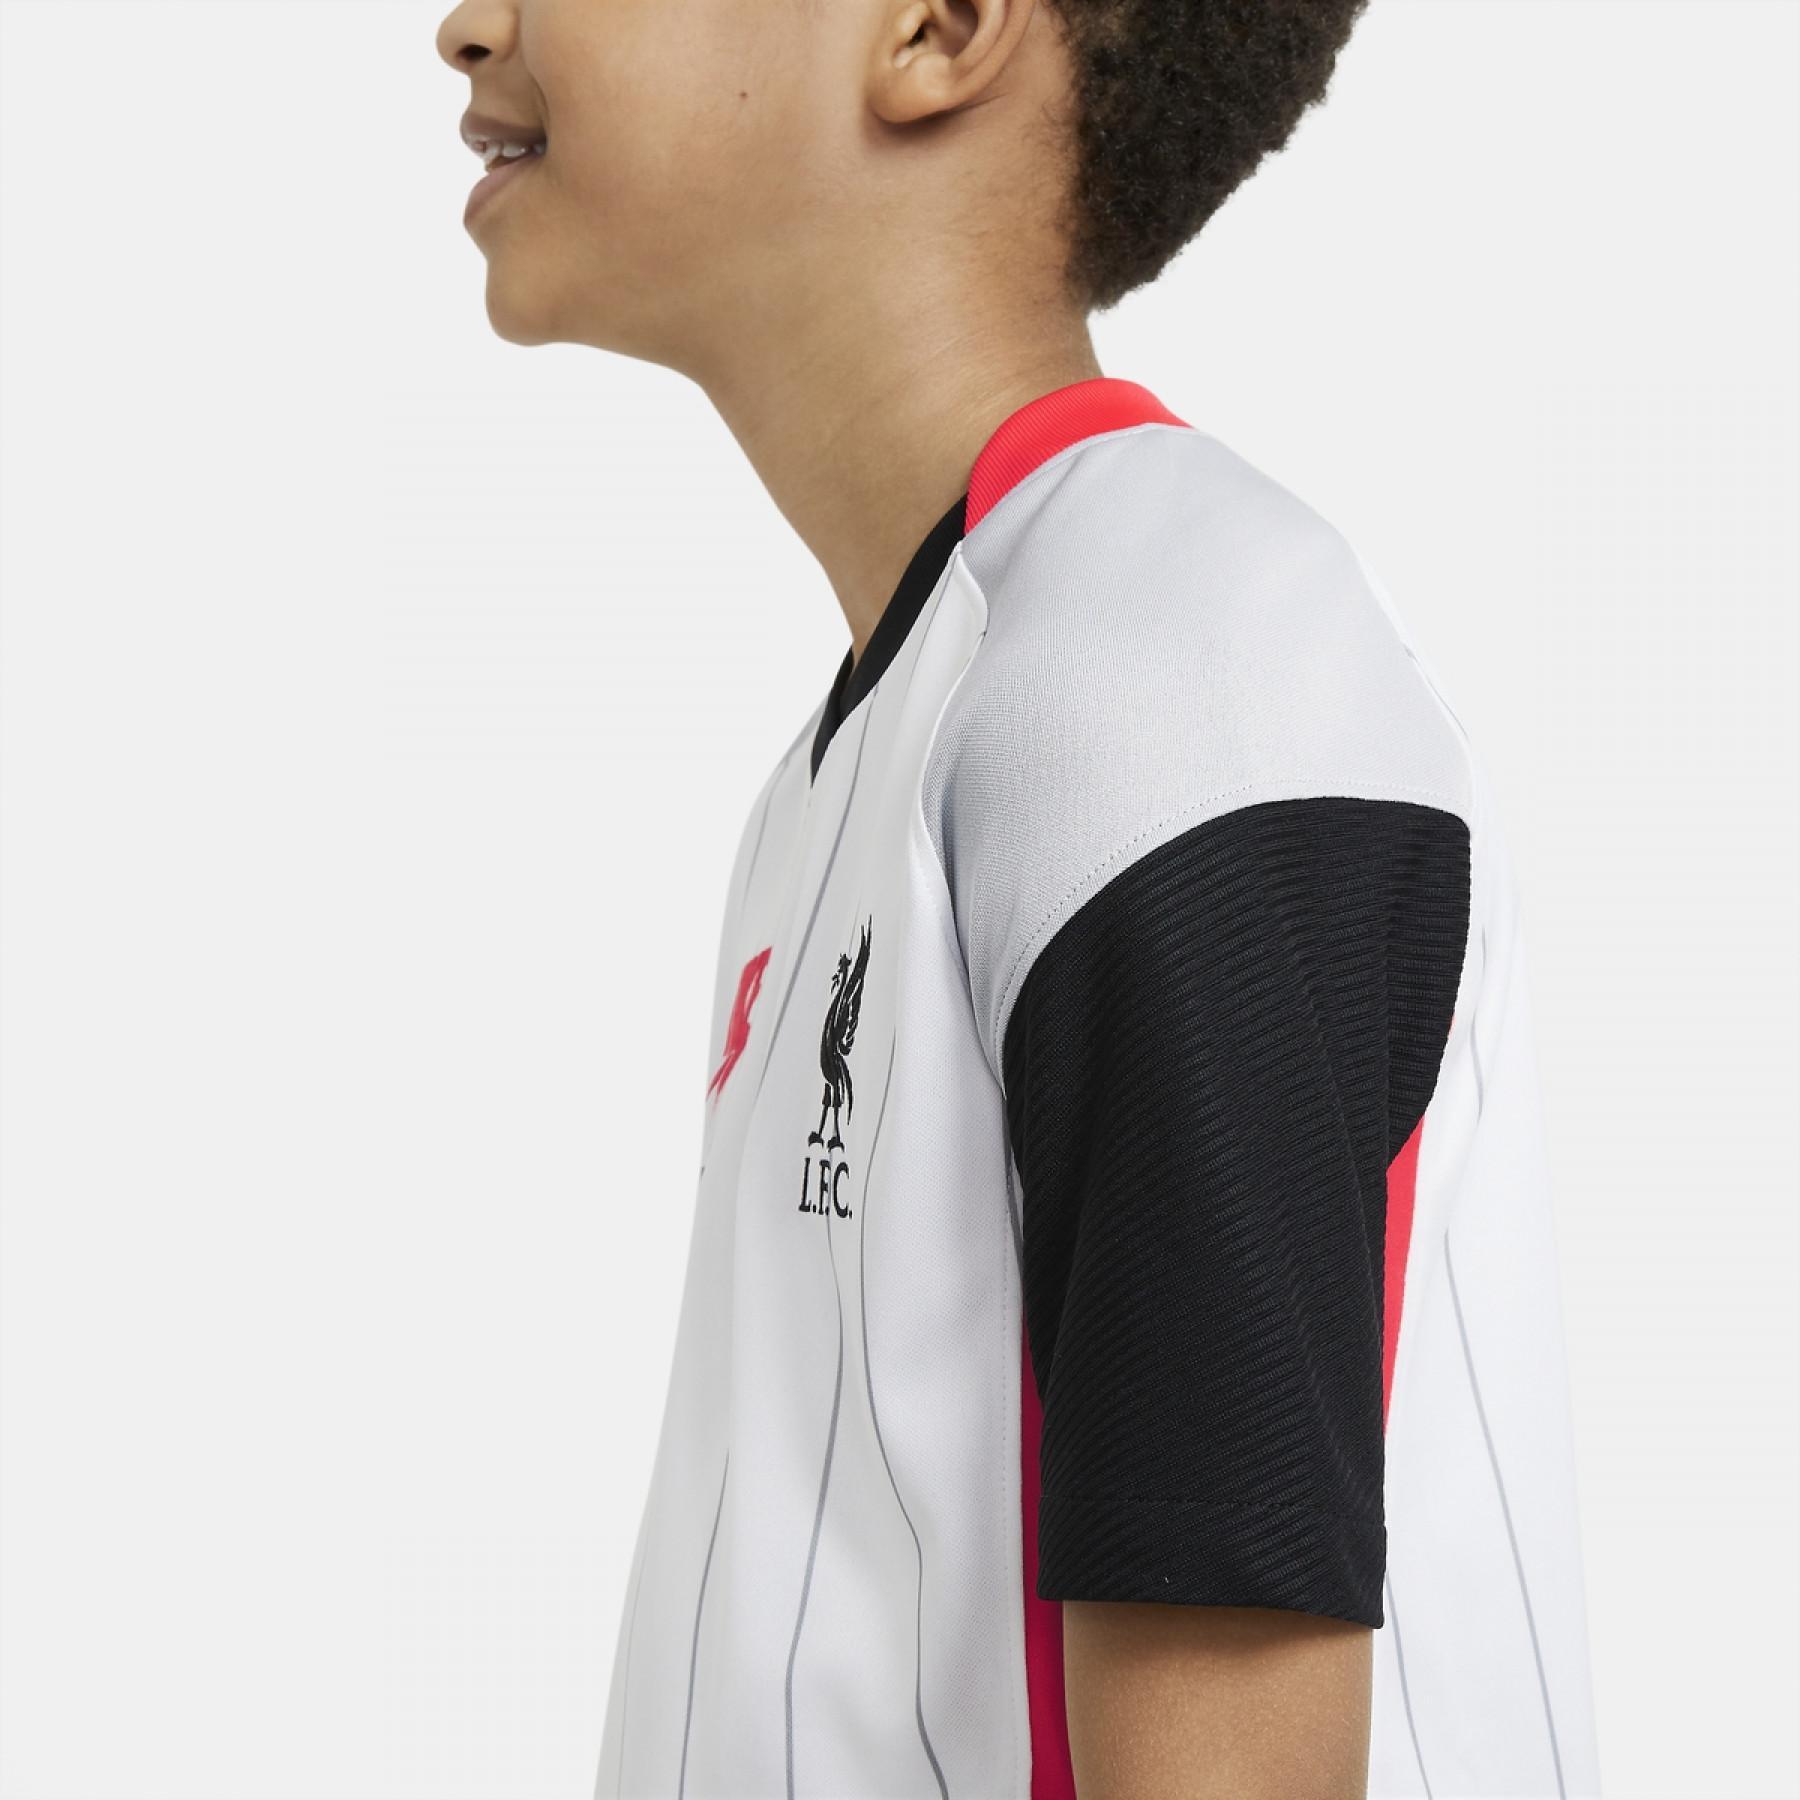 Maillot Fourth enfant Liverpool FC 2020/21